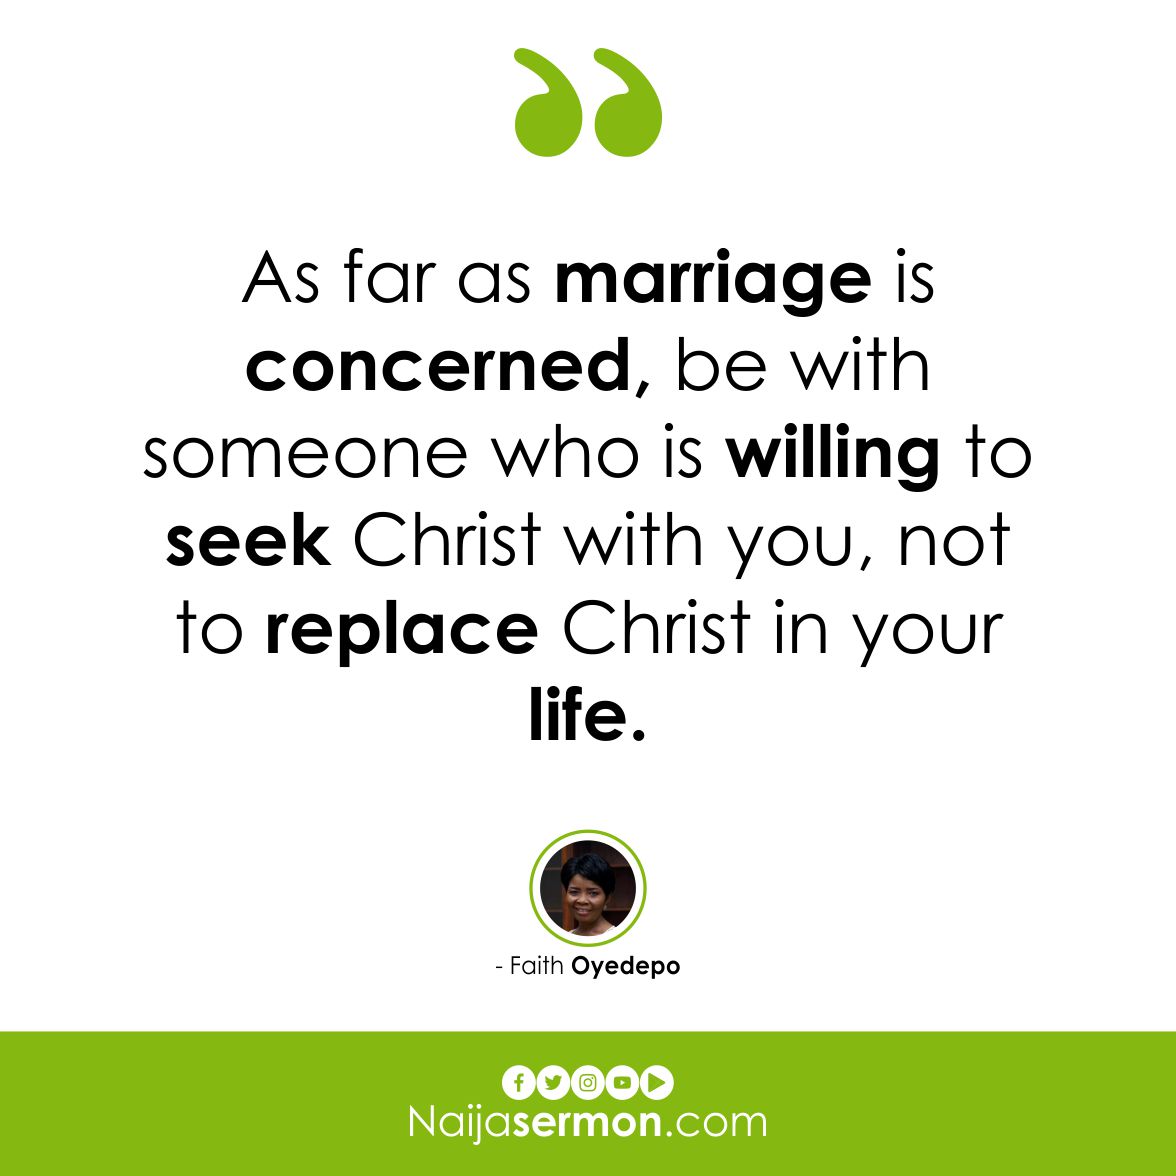 Quote of the Day by Faith Oyedepo 17